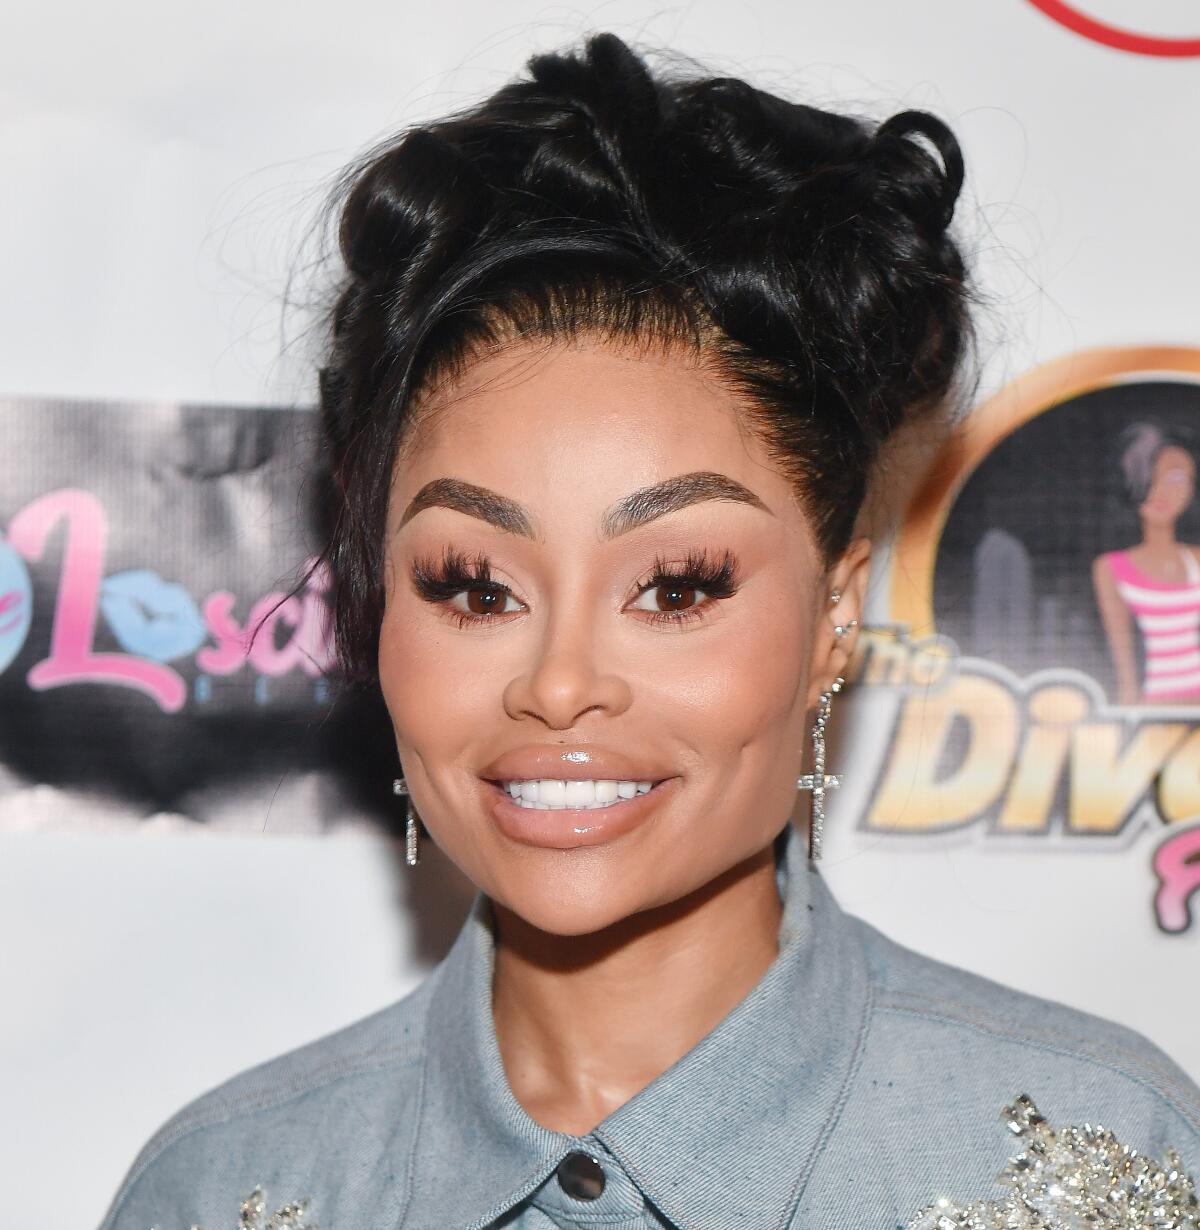 Blac Chyna smiles with her hair in a messy updo